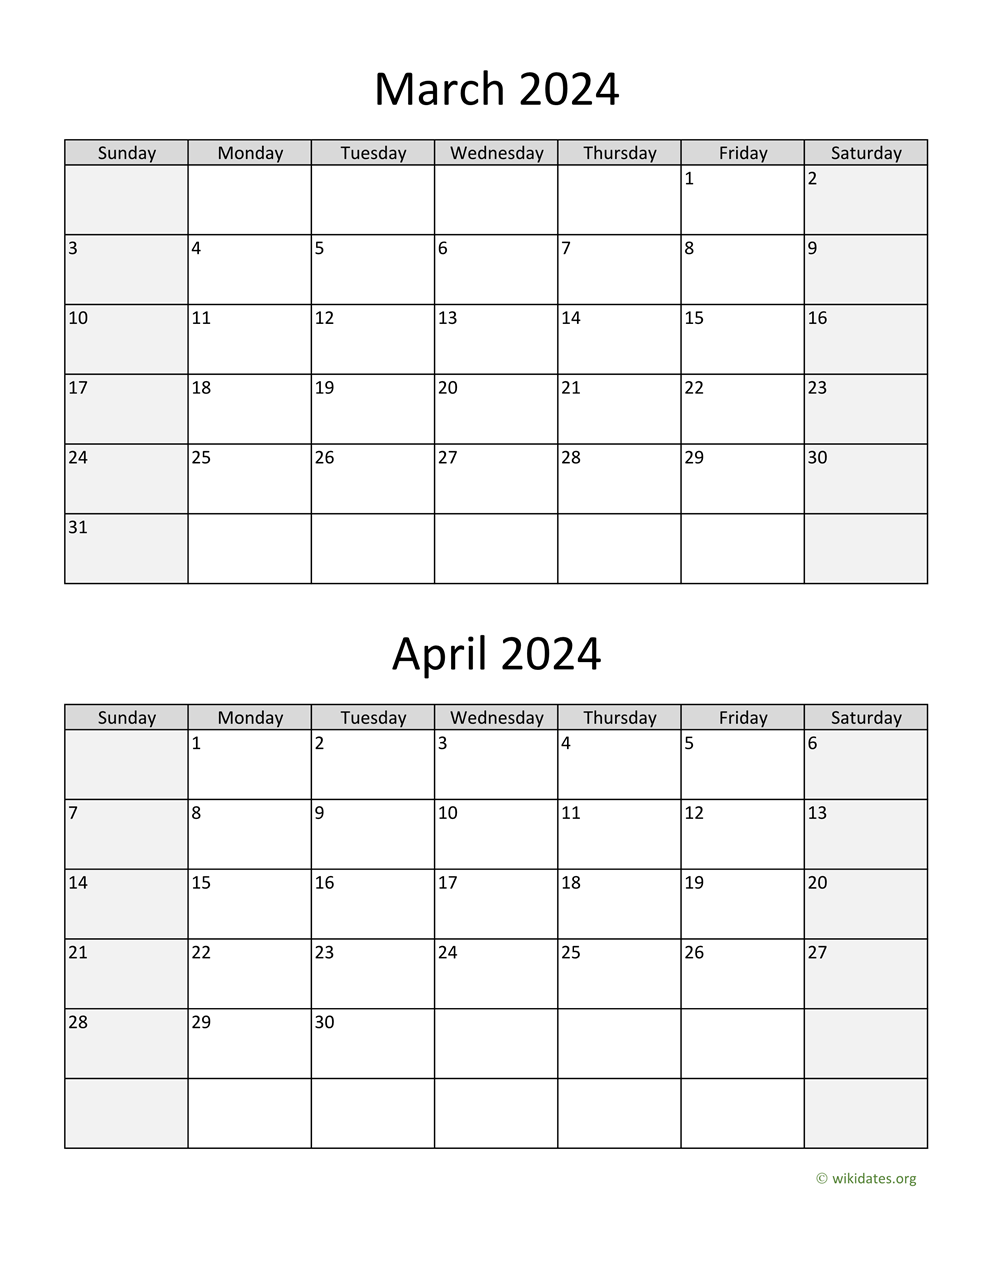 March And April 2024 Calendar | Wikidates for Printable Calendar For March And April 2024